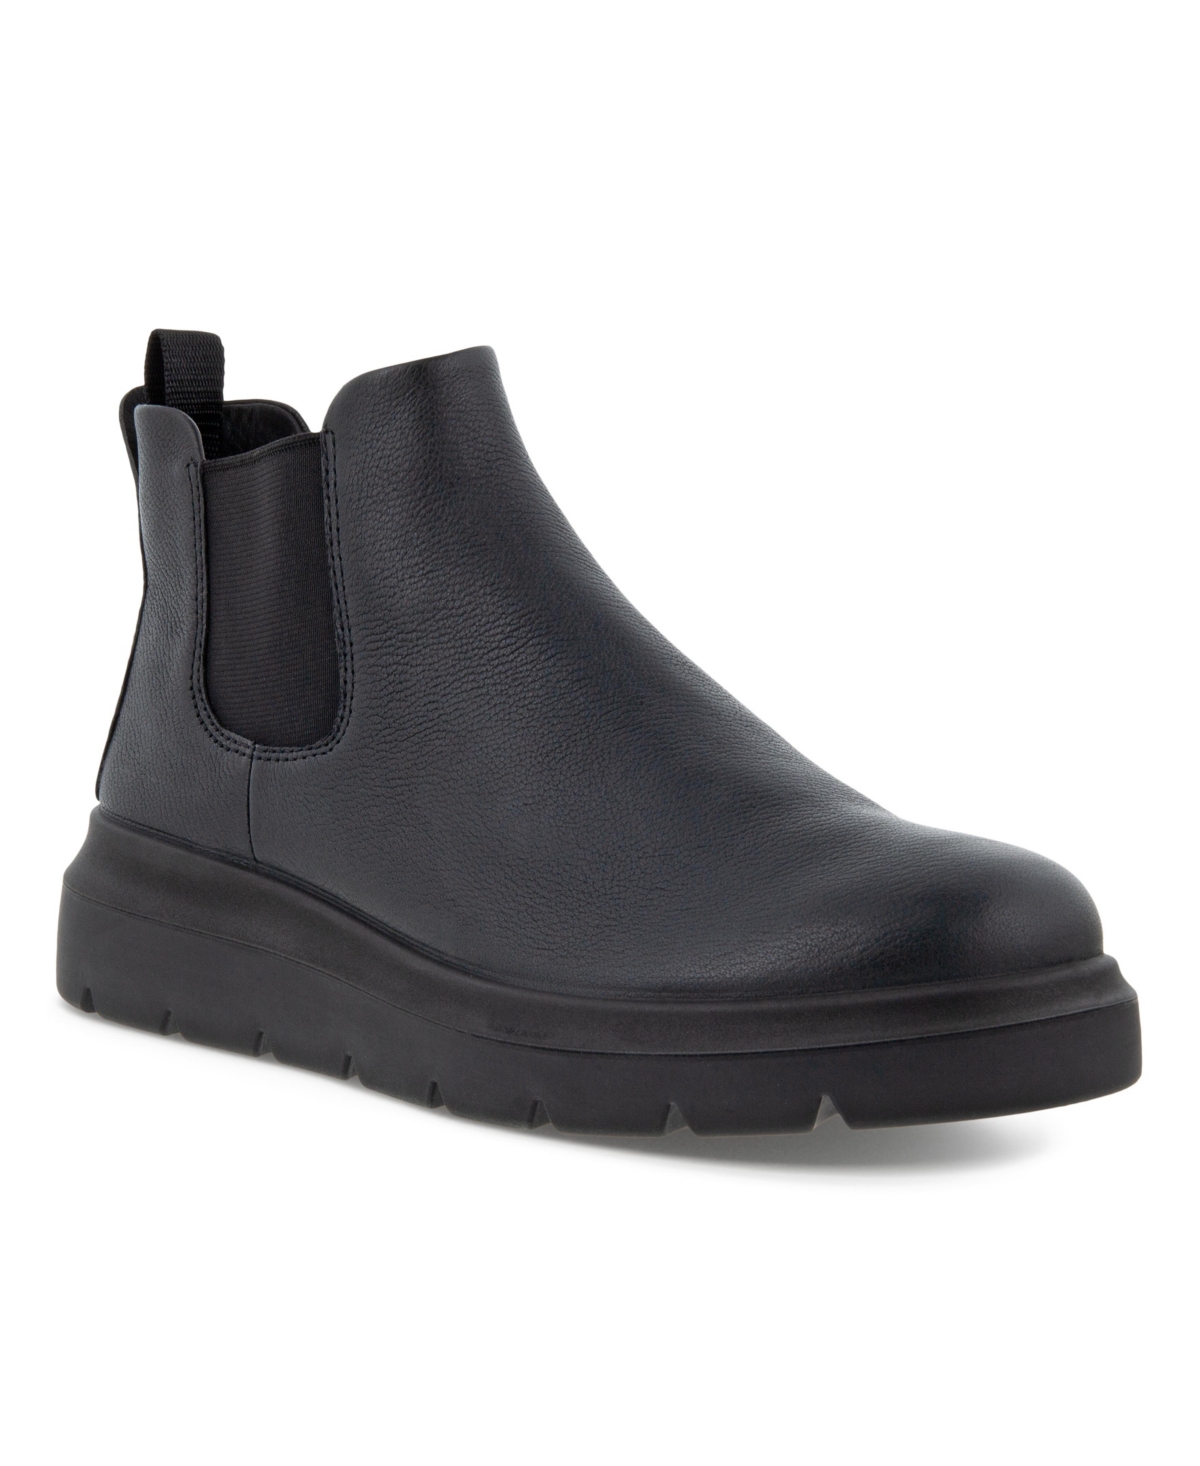 UPC 194890905030 product image for Ecco Women's Nouvelle Chelsea Nubuck Leather Boot Women's Shoes | upcitemdb.com